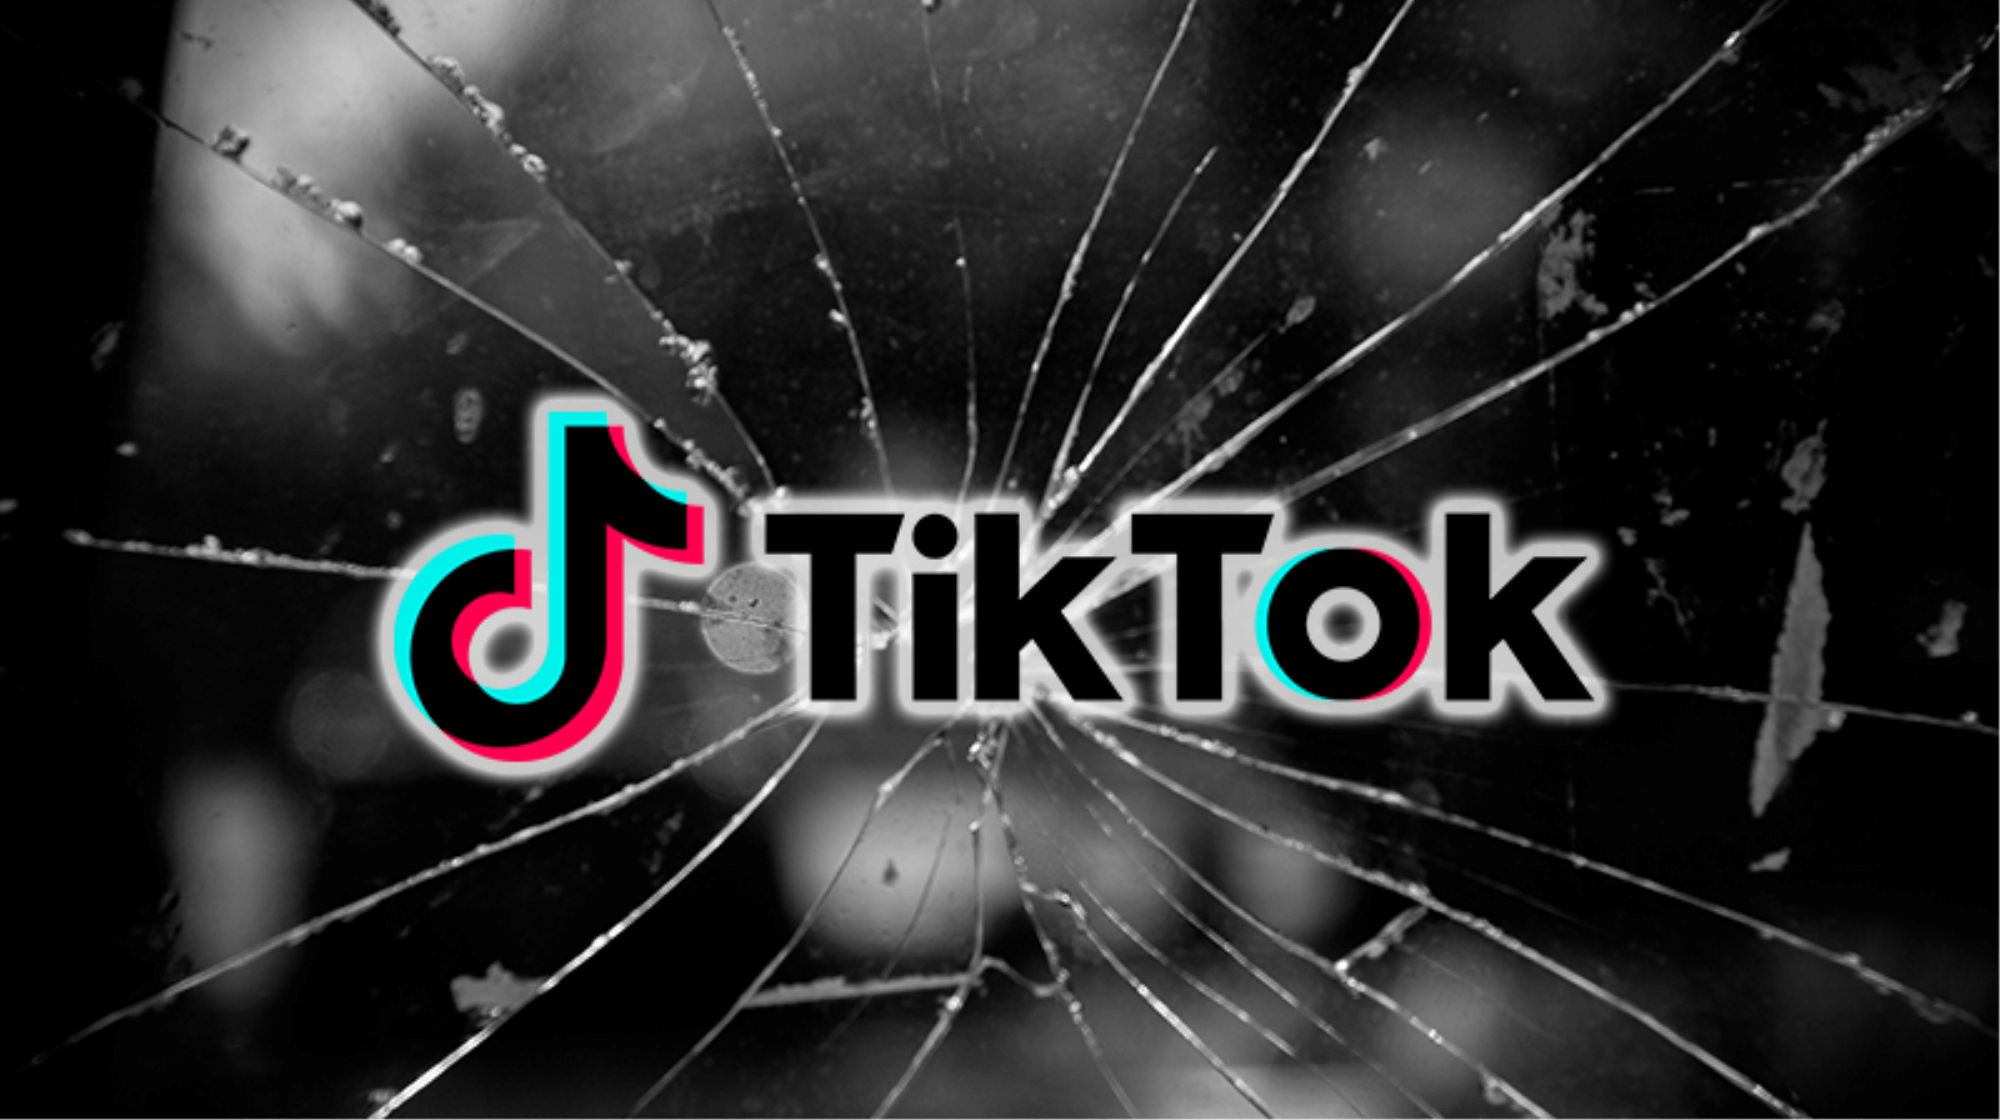 Bytedance is separating TikTok from its Chinese operations